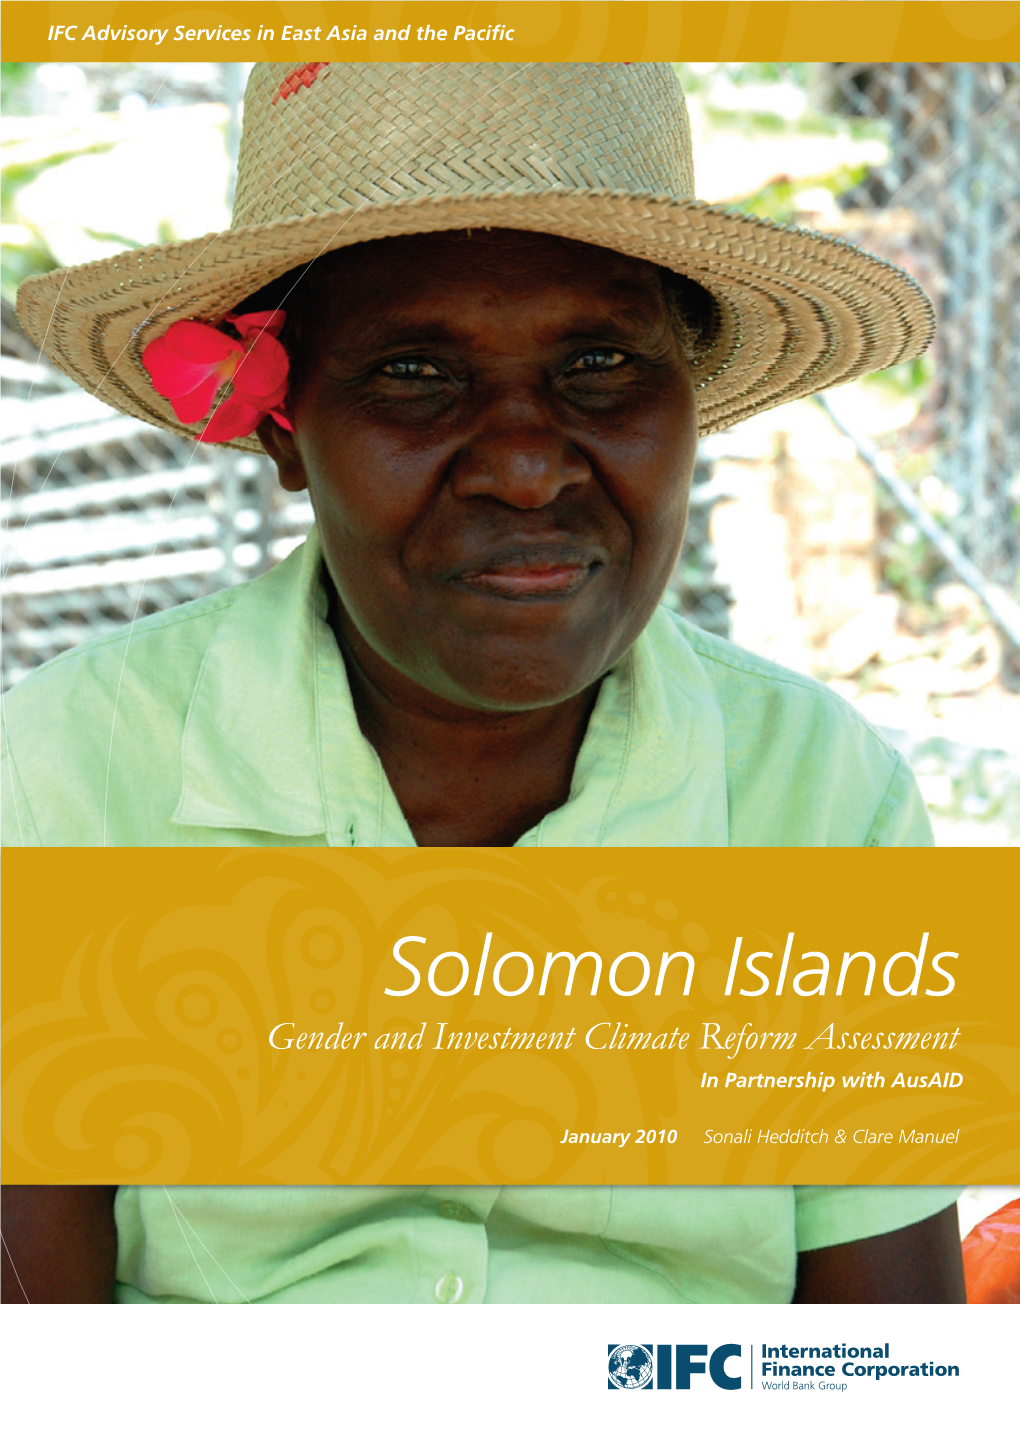 Solomon Islands Gender and Investment Climate Reform Assessment in Partnership with Ausaid